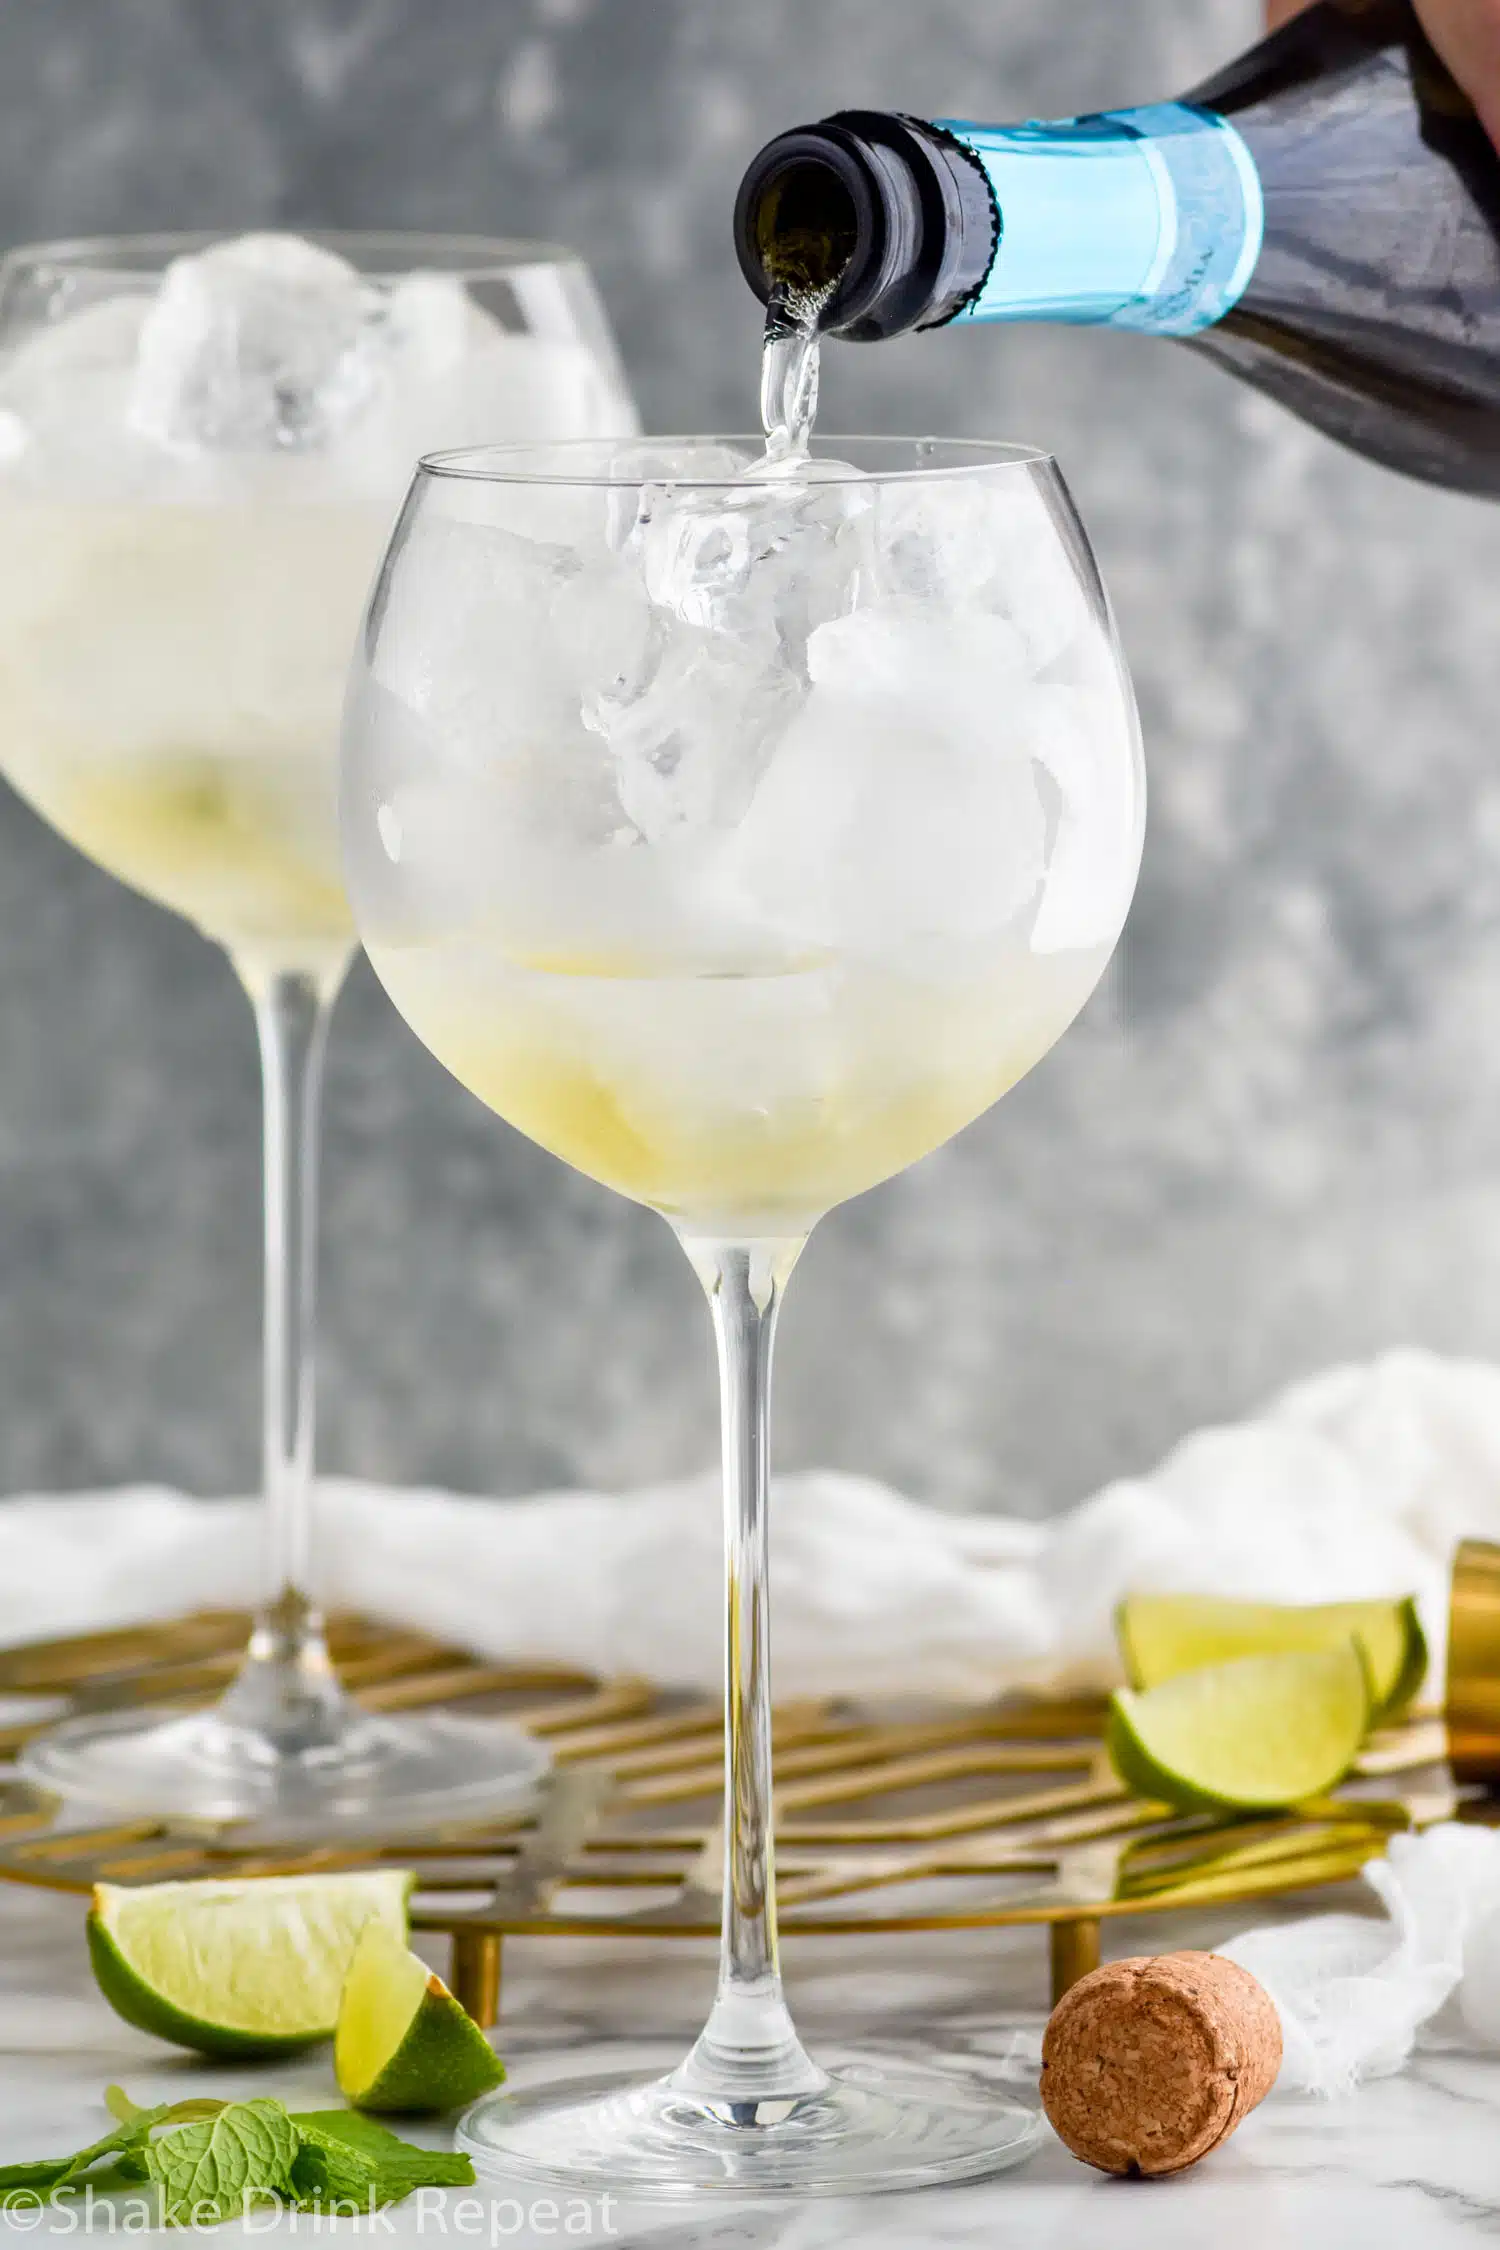 bottle of sparkling wine pouring into a wine glass with ice. Mint leaves and lime slices sitting beside glass.